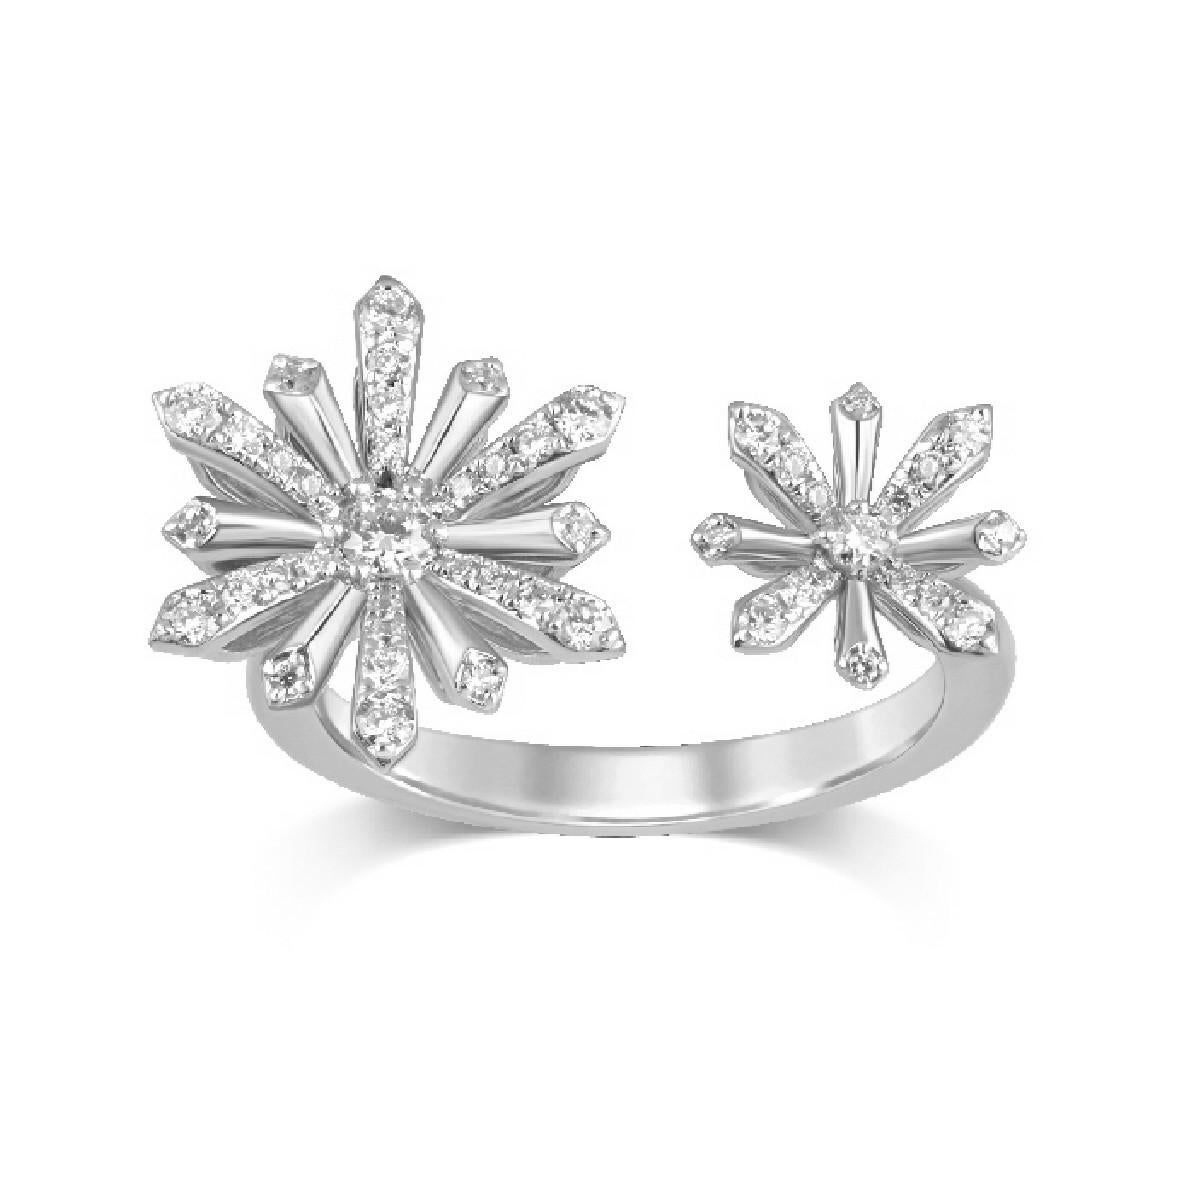 Edelweiss collection...
Option of yellow or rose gold.
Pieces make to order in finish and size
18k White gold and diamond ring with two flowers
weighing 4.73 g and 48 diamonds 0.38 ct

The Alpine 